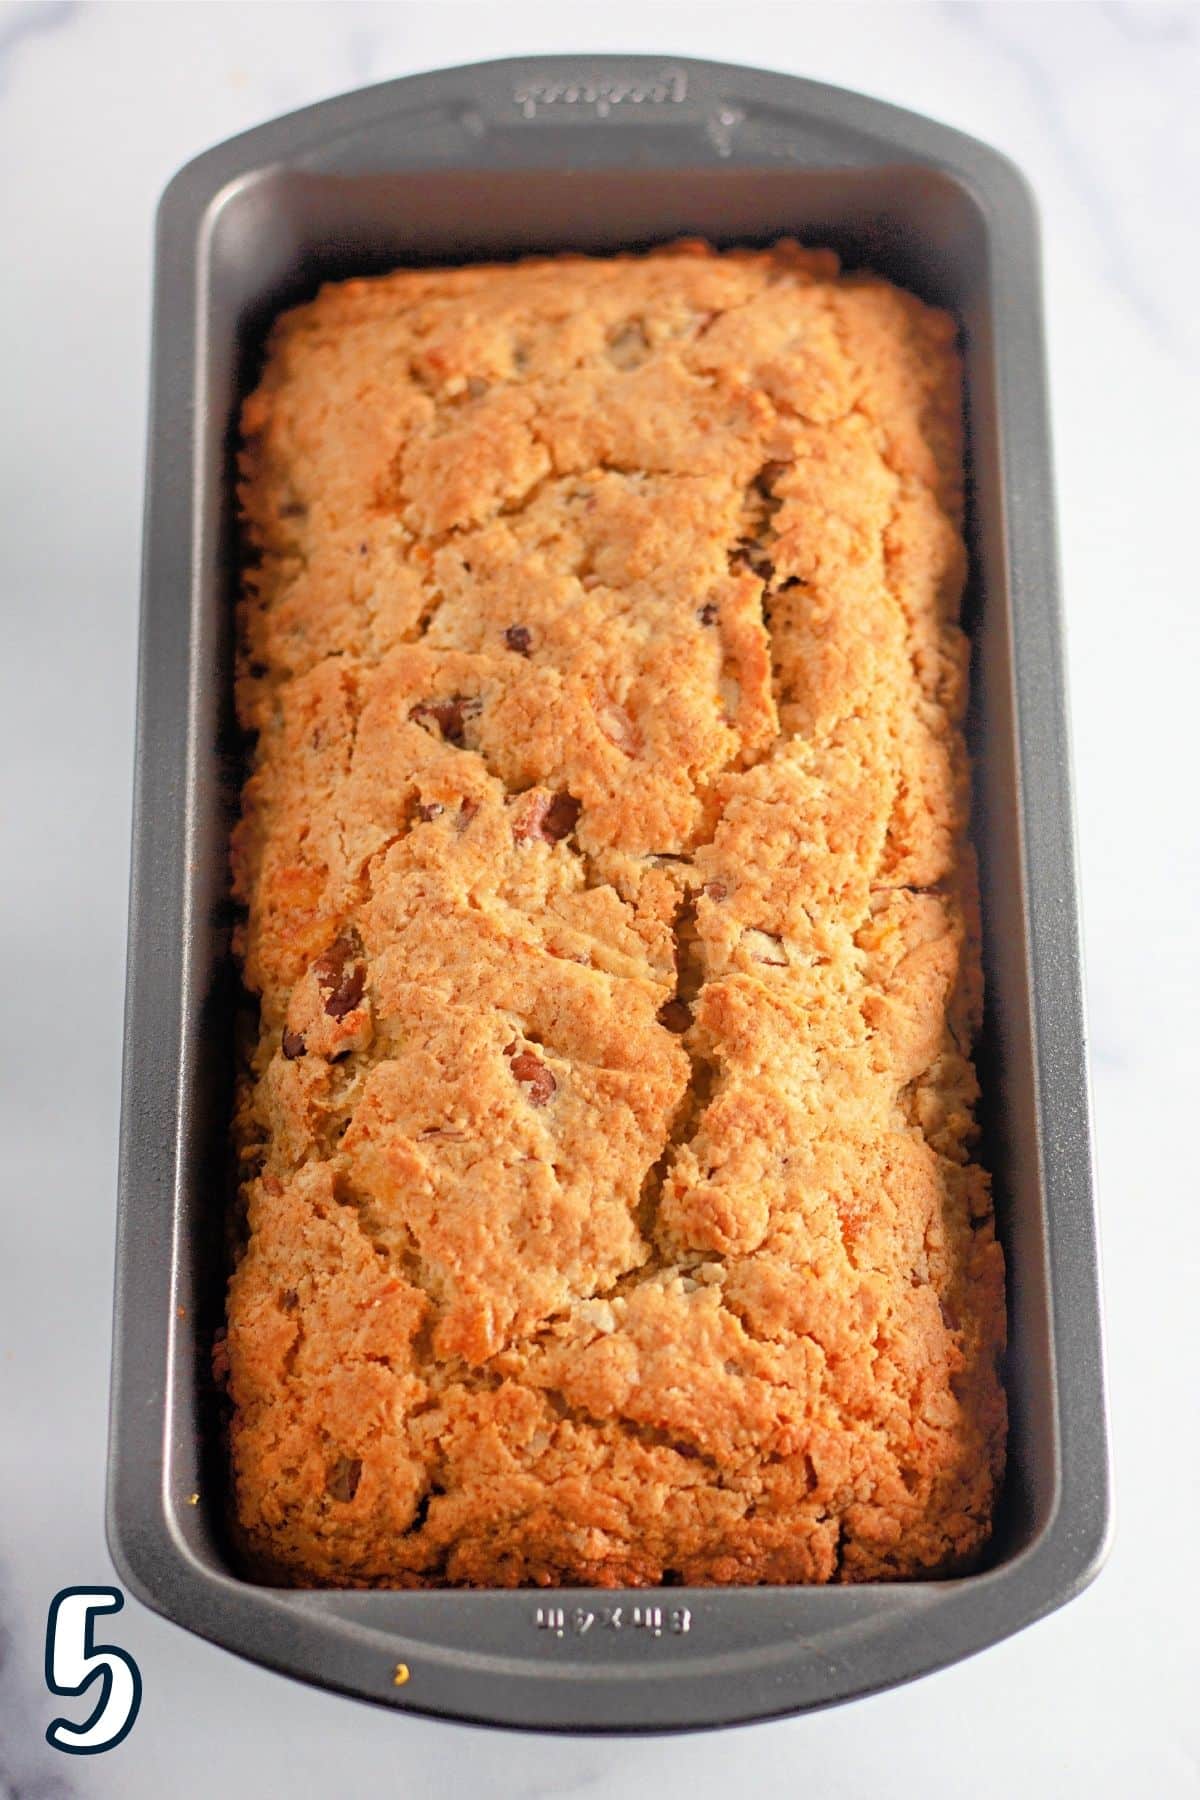 Just baked orange quick bread still in the loaf pan. 